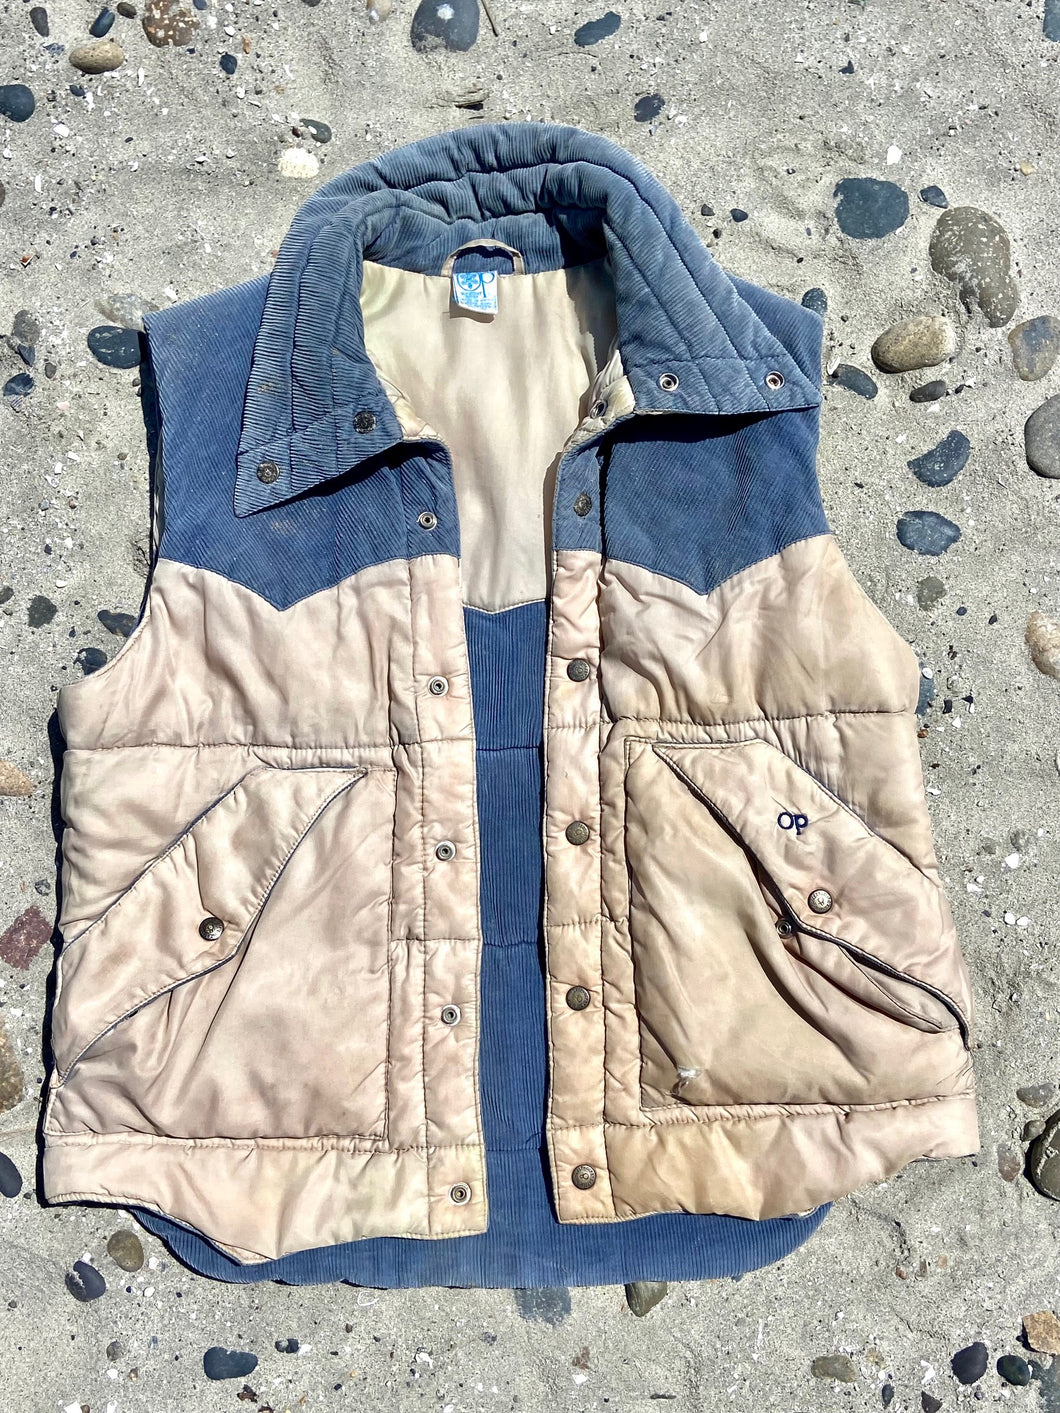 Vintage early 1980's OP Cord/Puff vest. Size Large